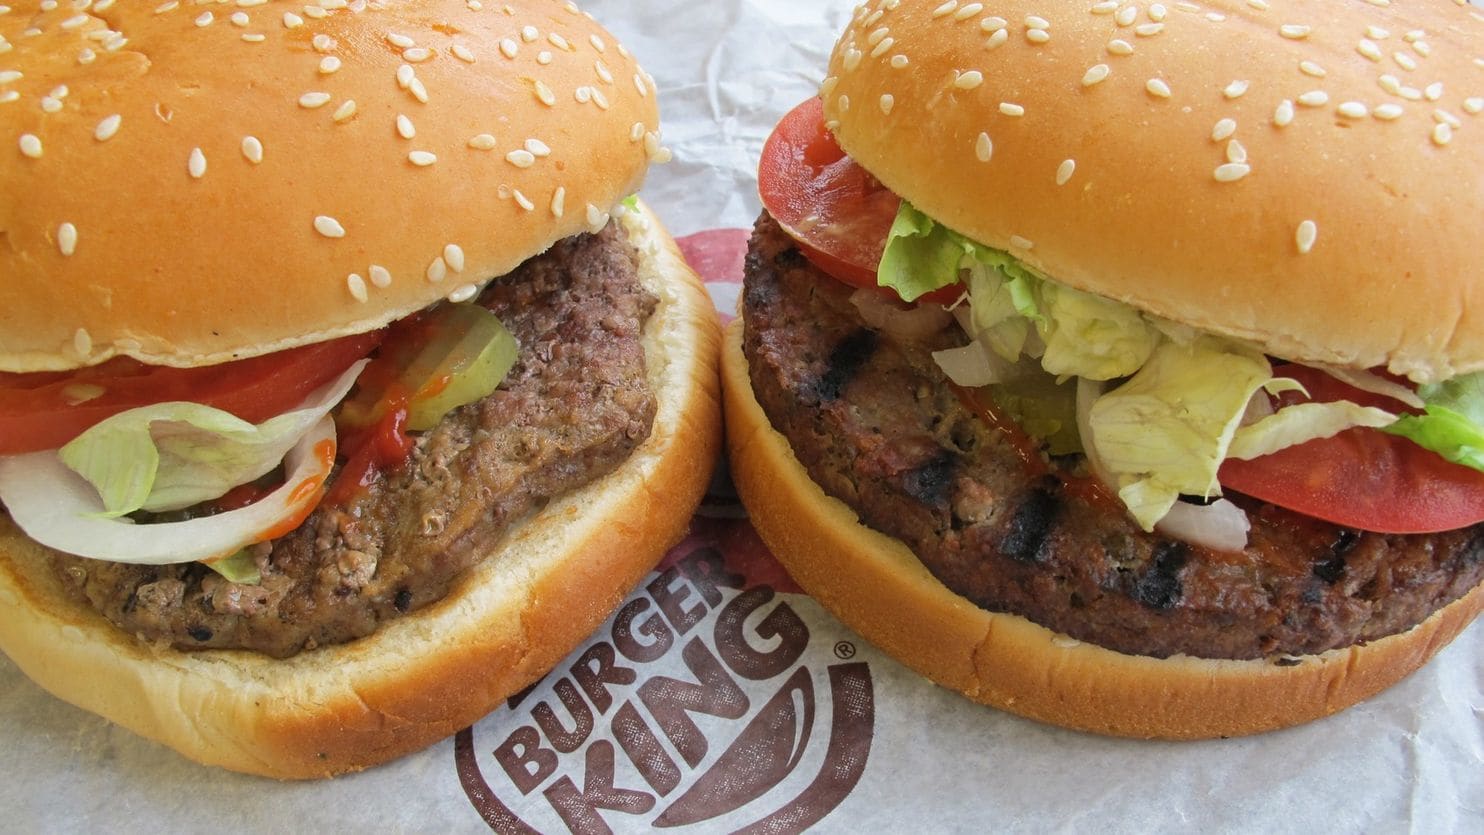 Burger King Reports Increased Sales of Conventional Beef Burgers Alongside Climbing Impossible Burger Sales